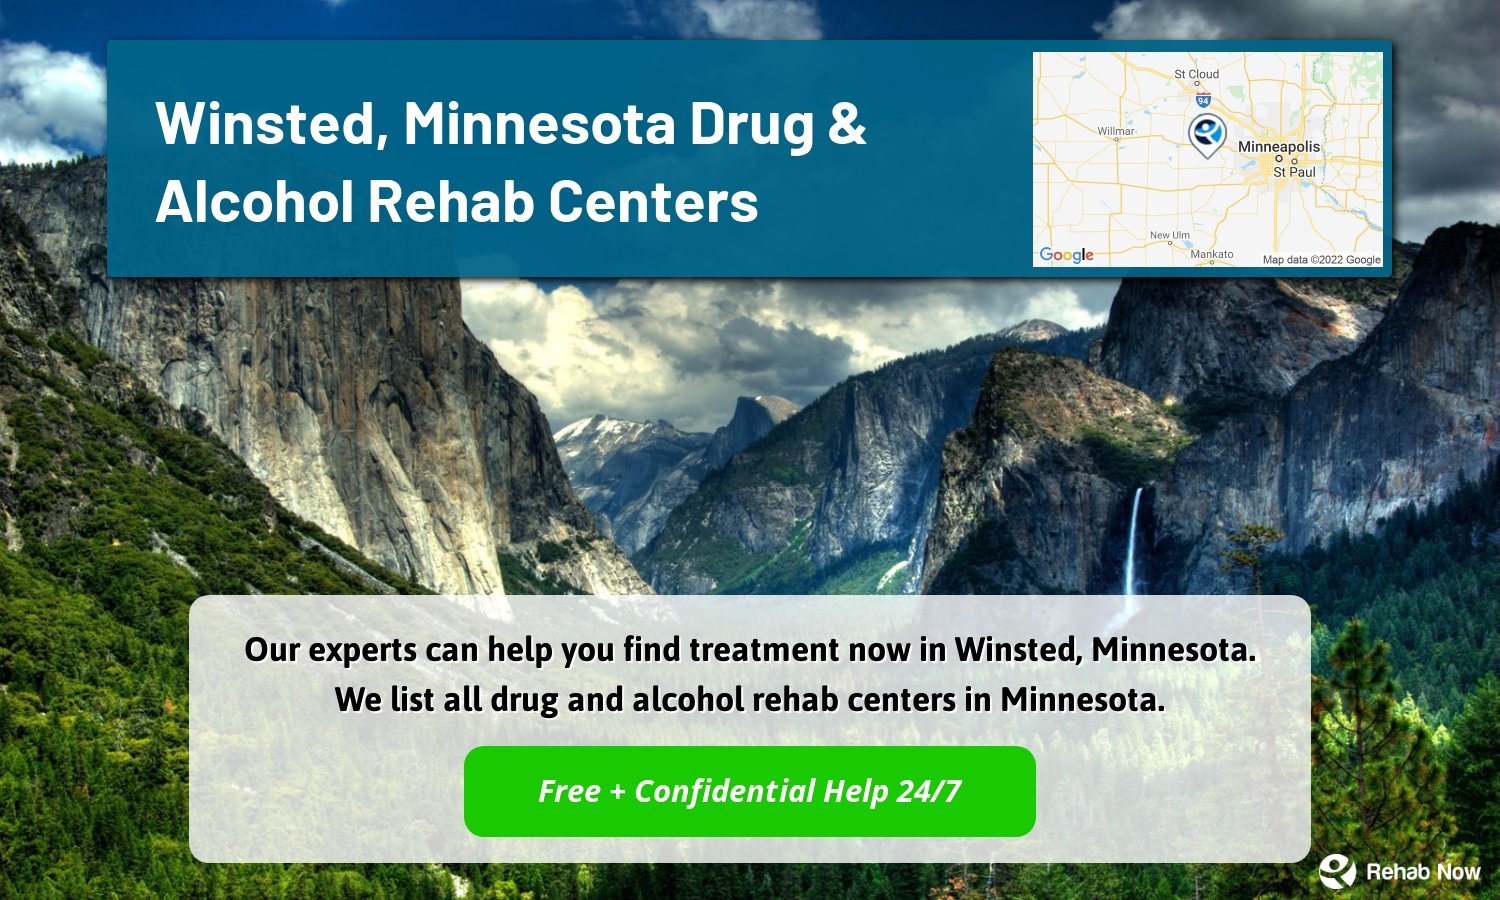 Our experts can help you find treatment now in Winsted, Minnesota. We list all drug and alcohol rehab centers in Minnesota.